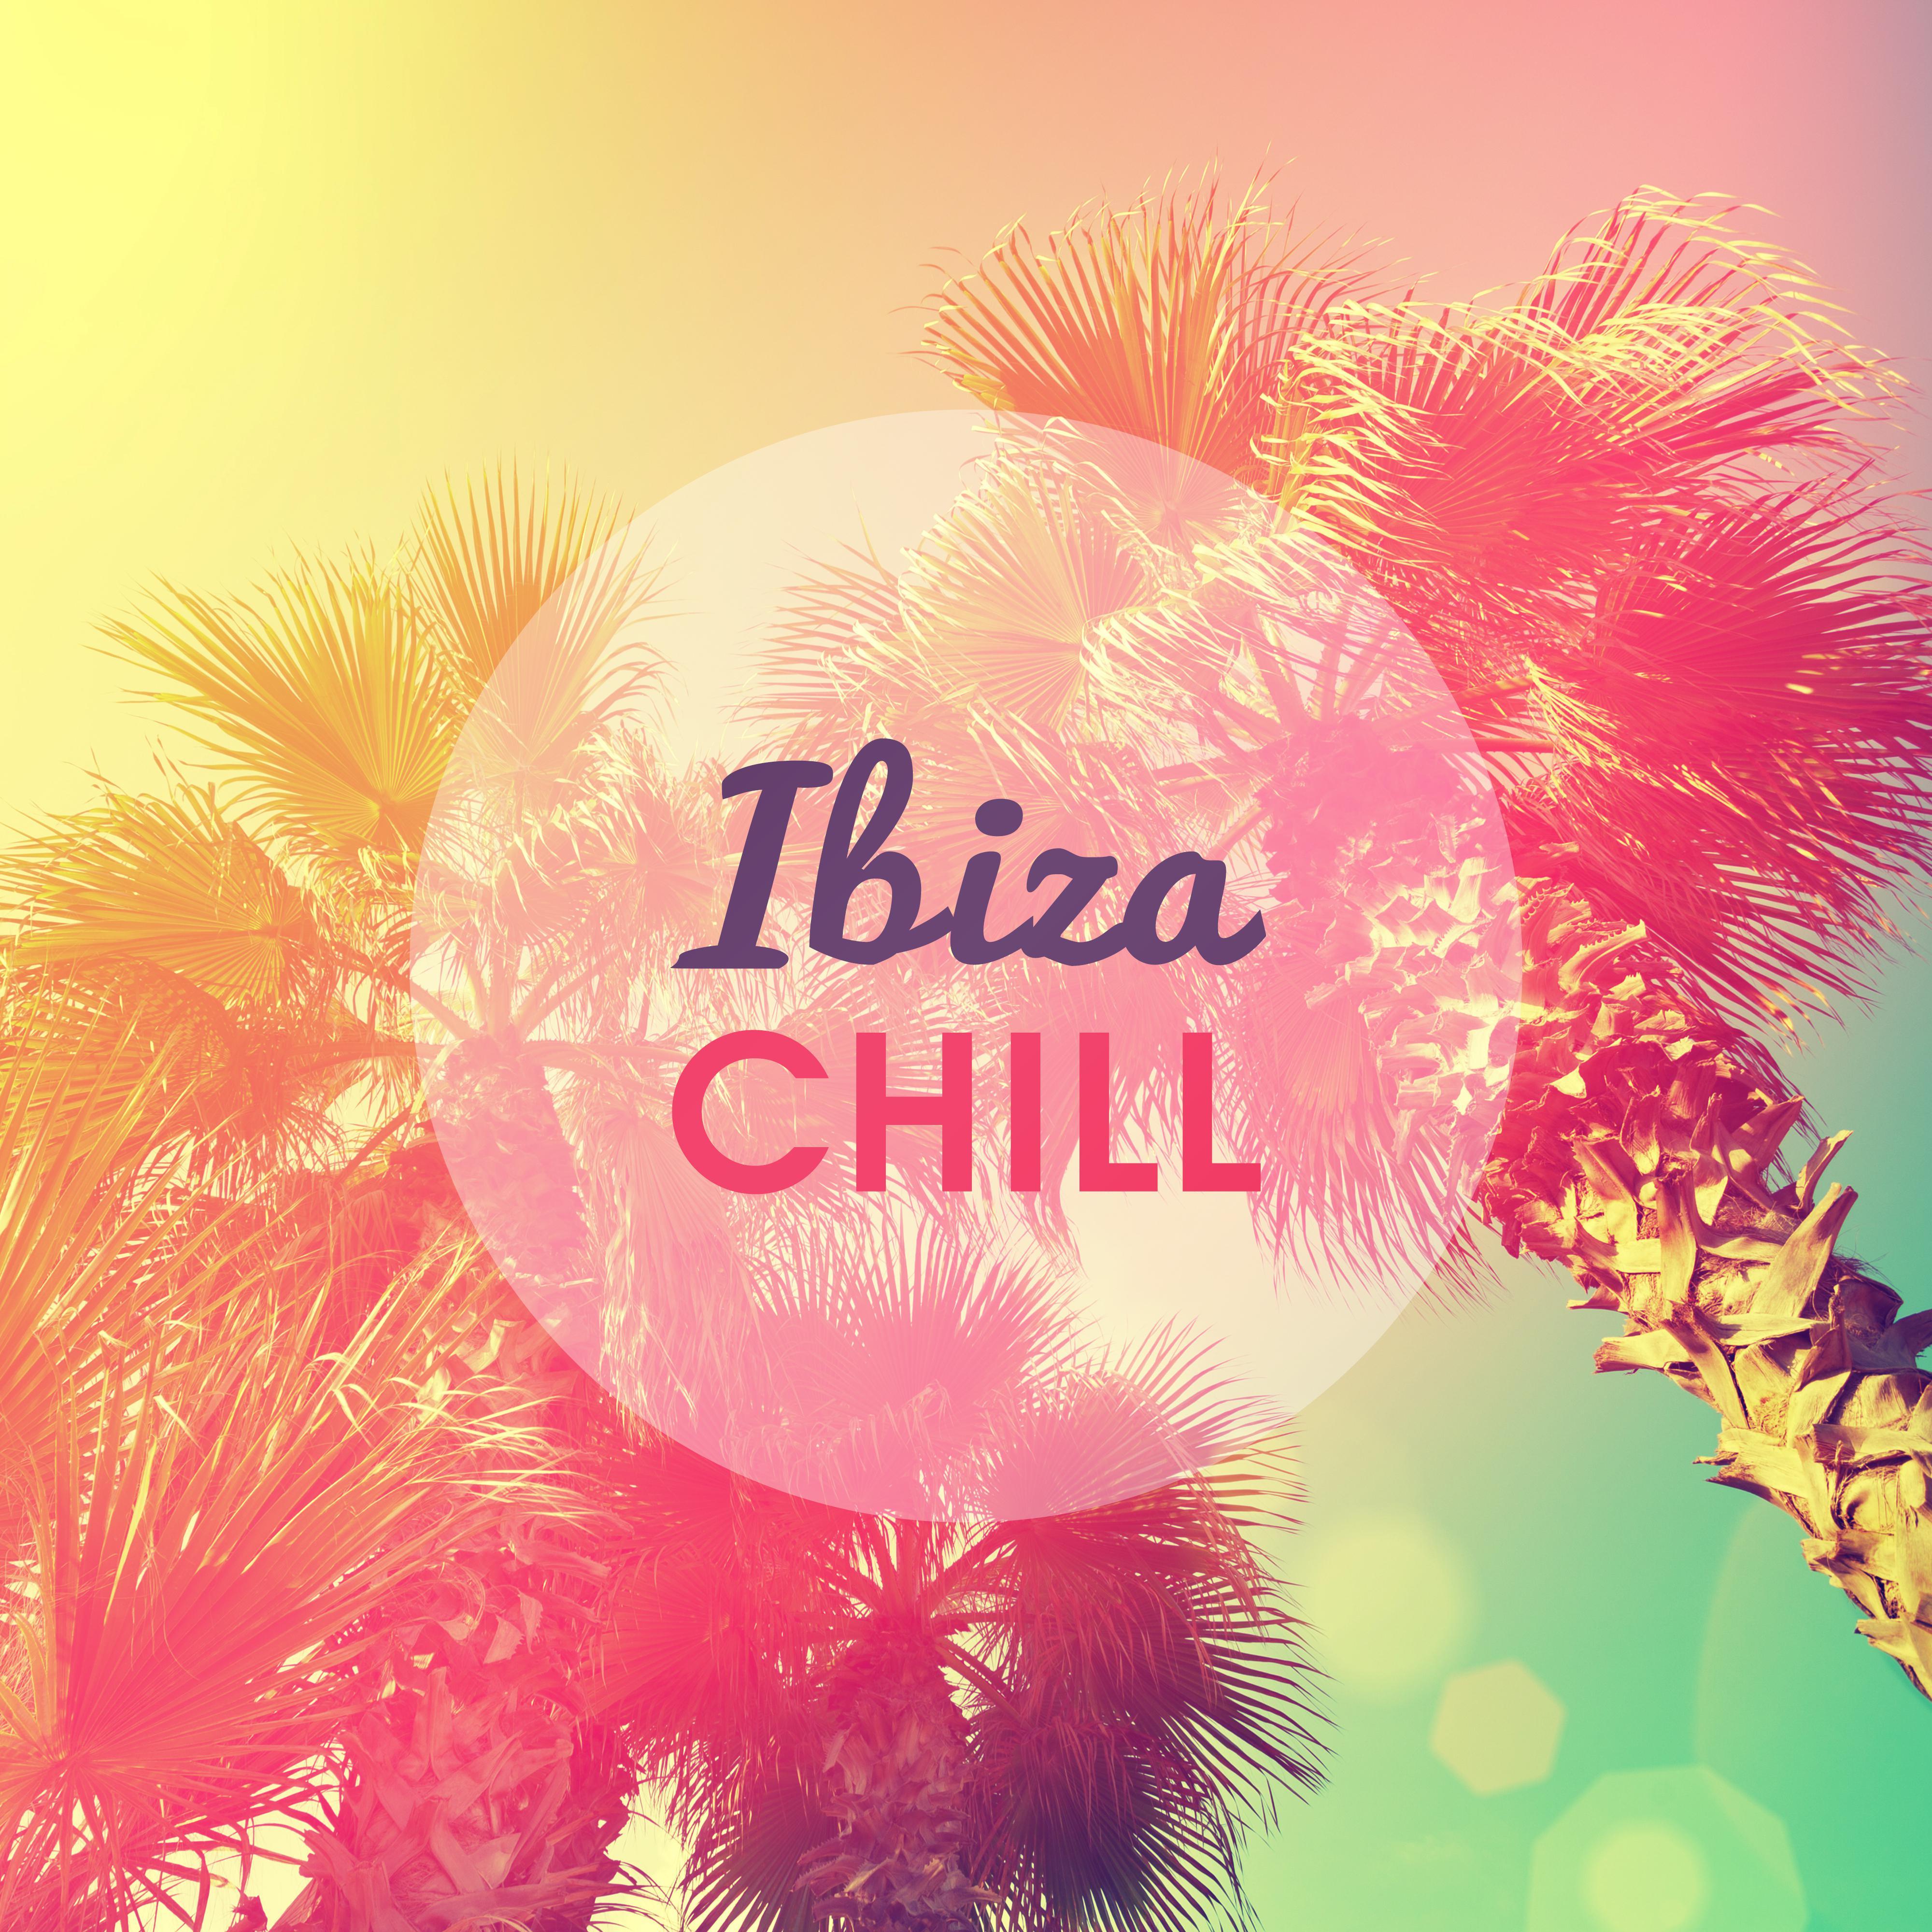 Ibiza Chill – Pure Relaxation, Holiday Songs, Drink Bar, Cocktails & Drinks, Beach Party, **** Vibes, Summer Chill, Best Chill Out Music 2017